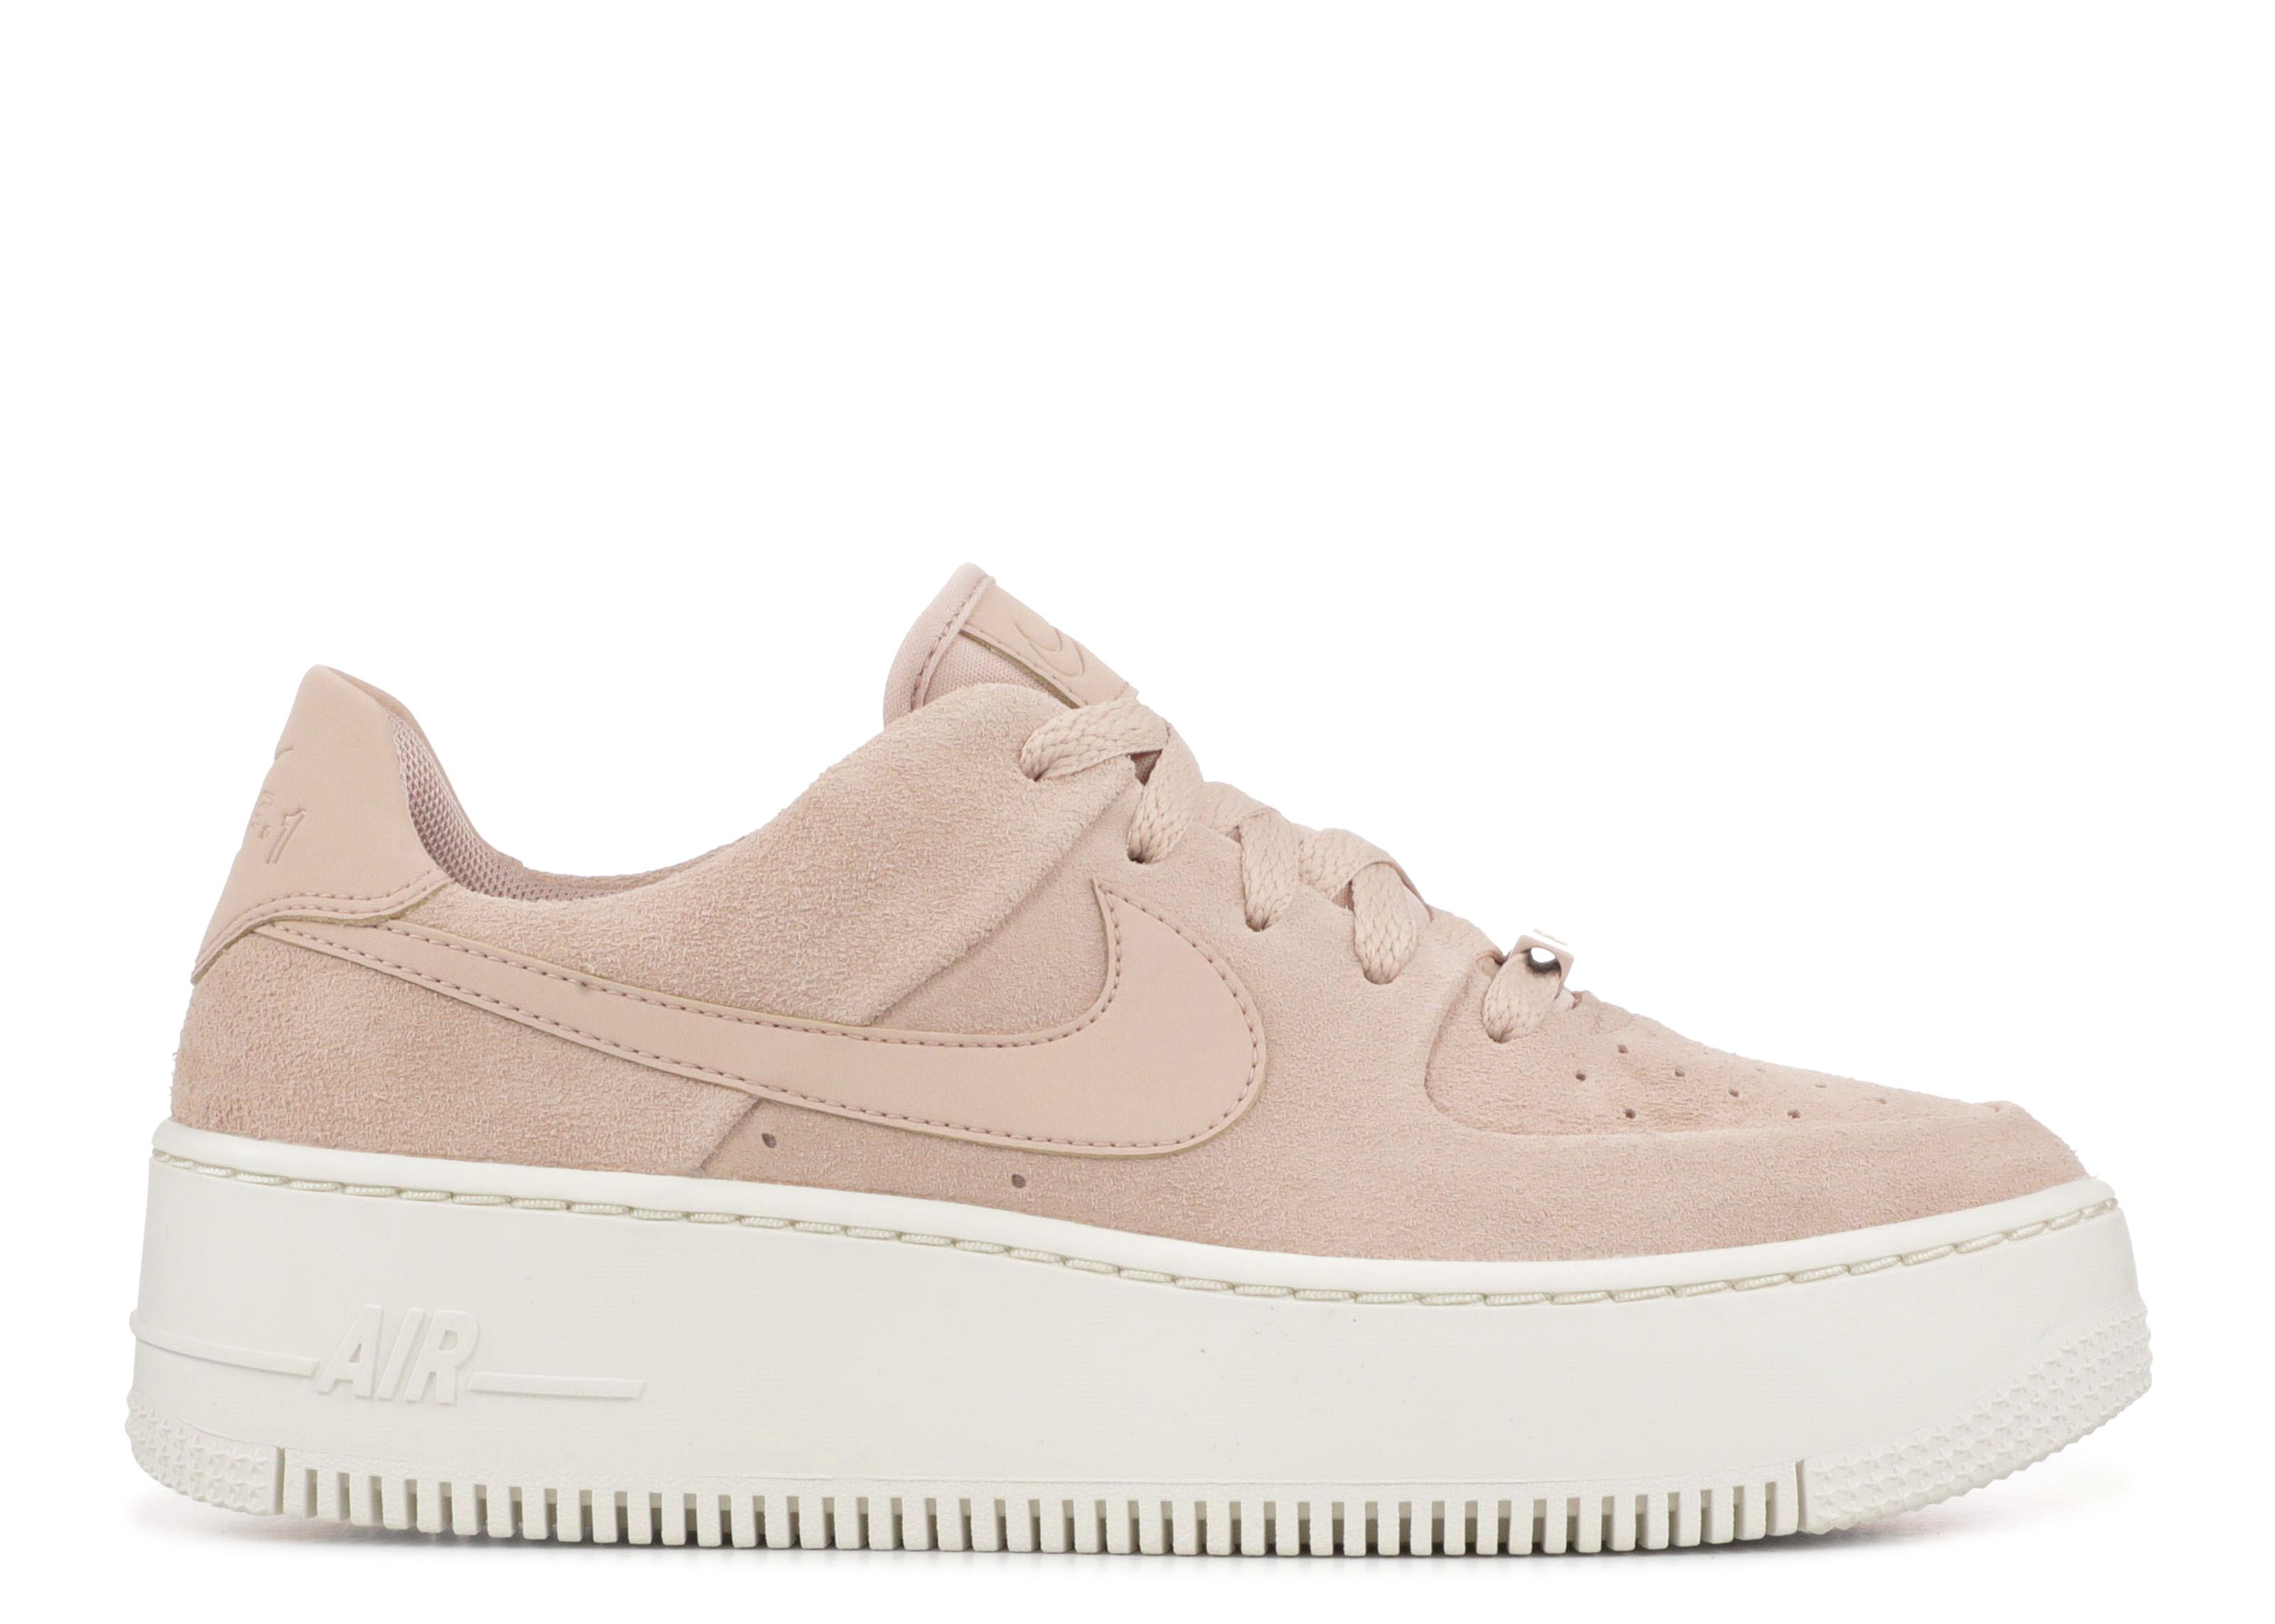 Кроссовки Nike Wmns Air Force 1 Sage Low 'Particle Beige', белый